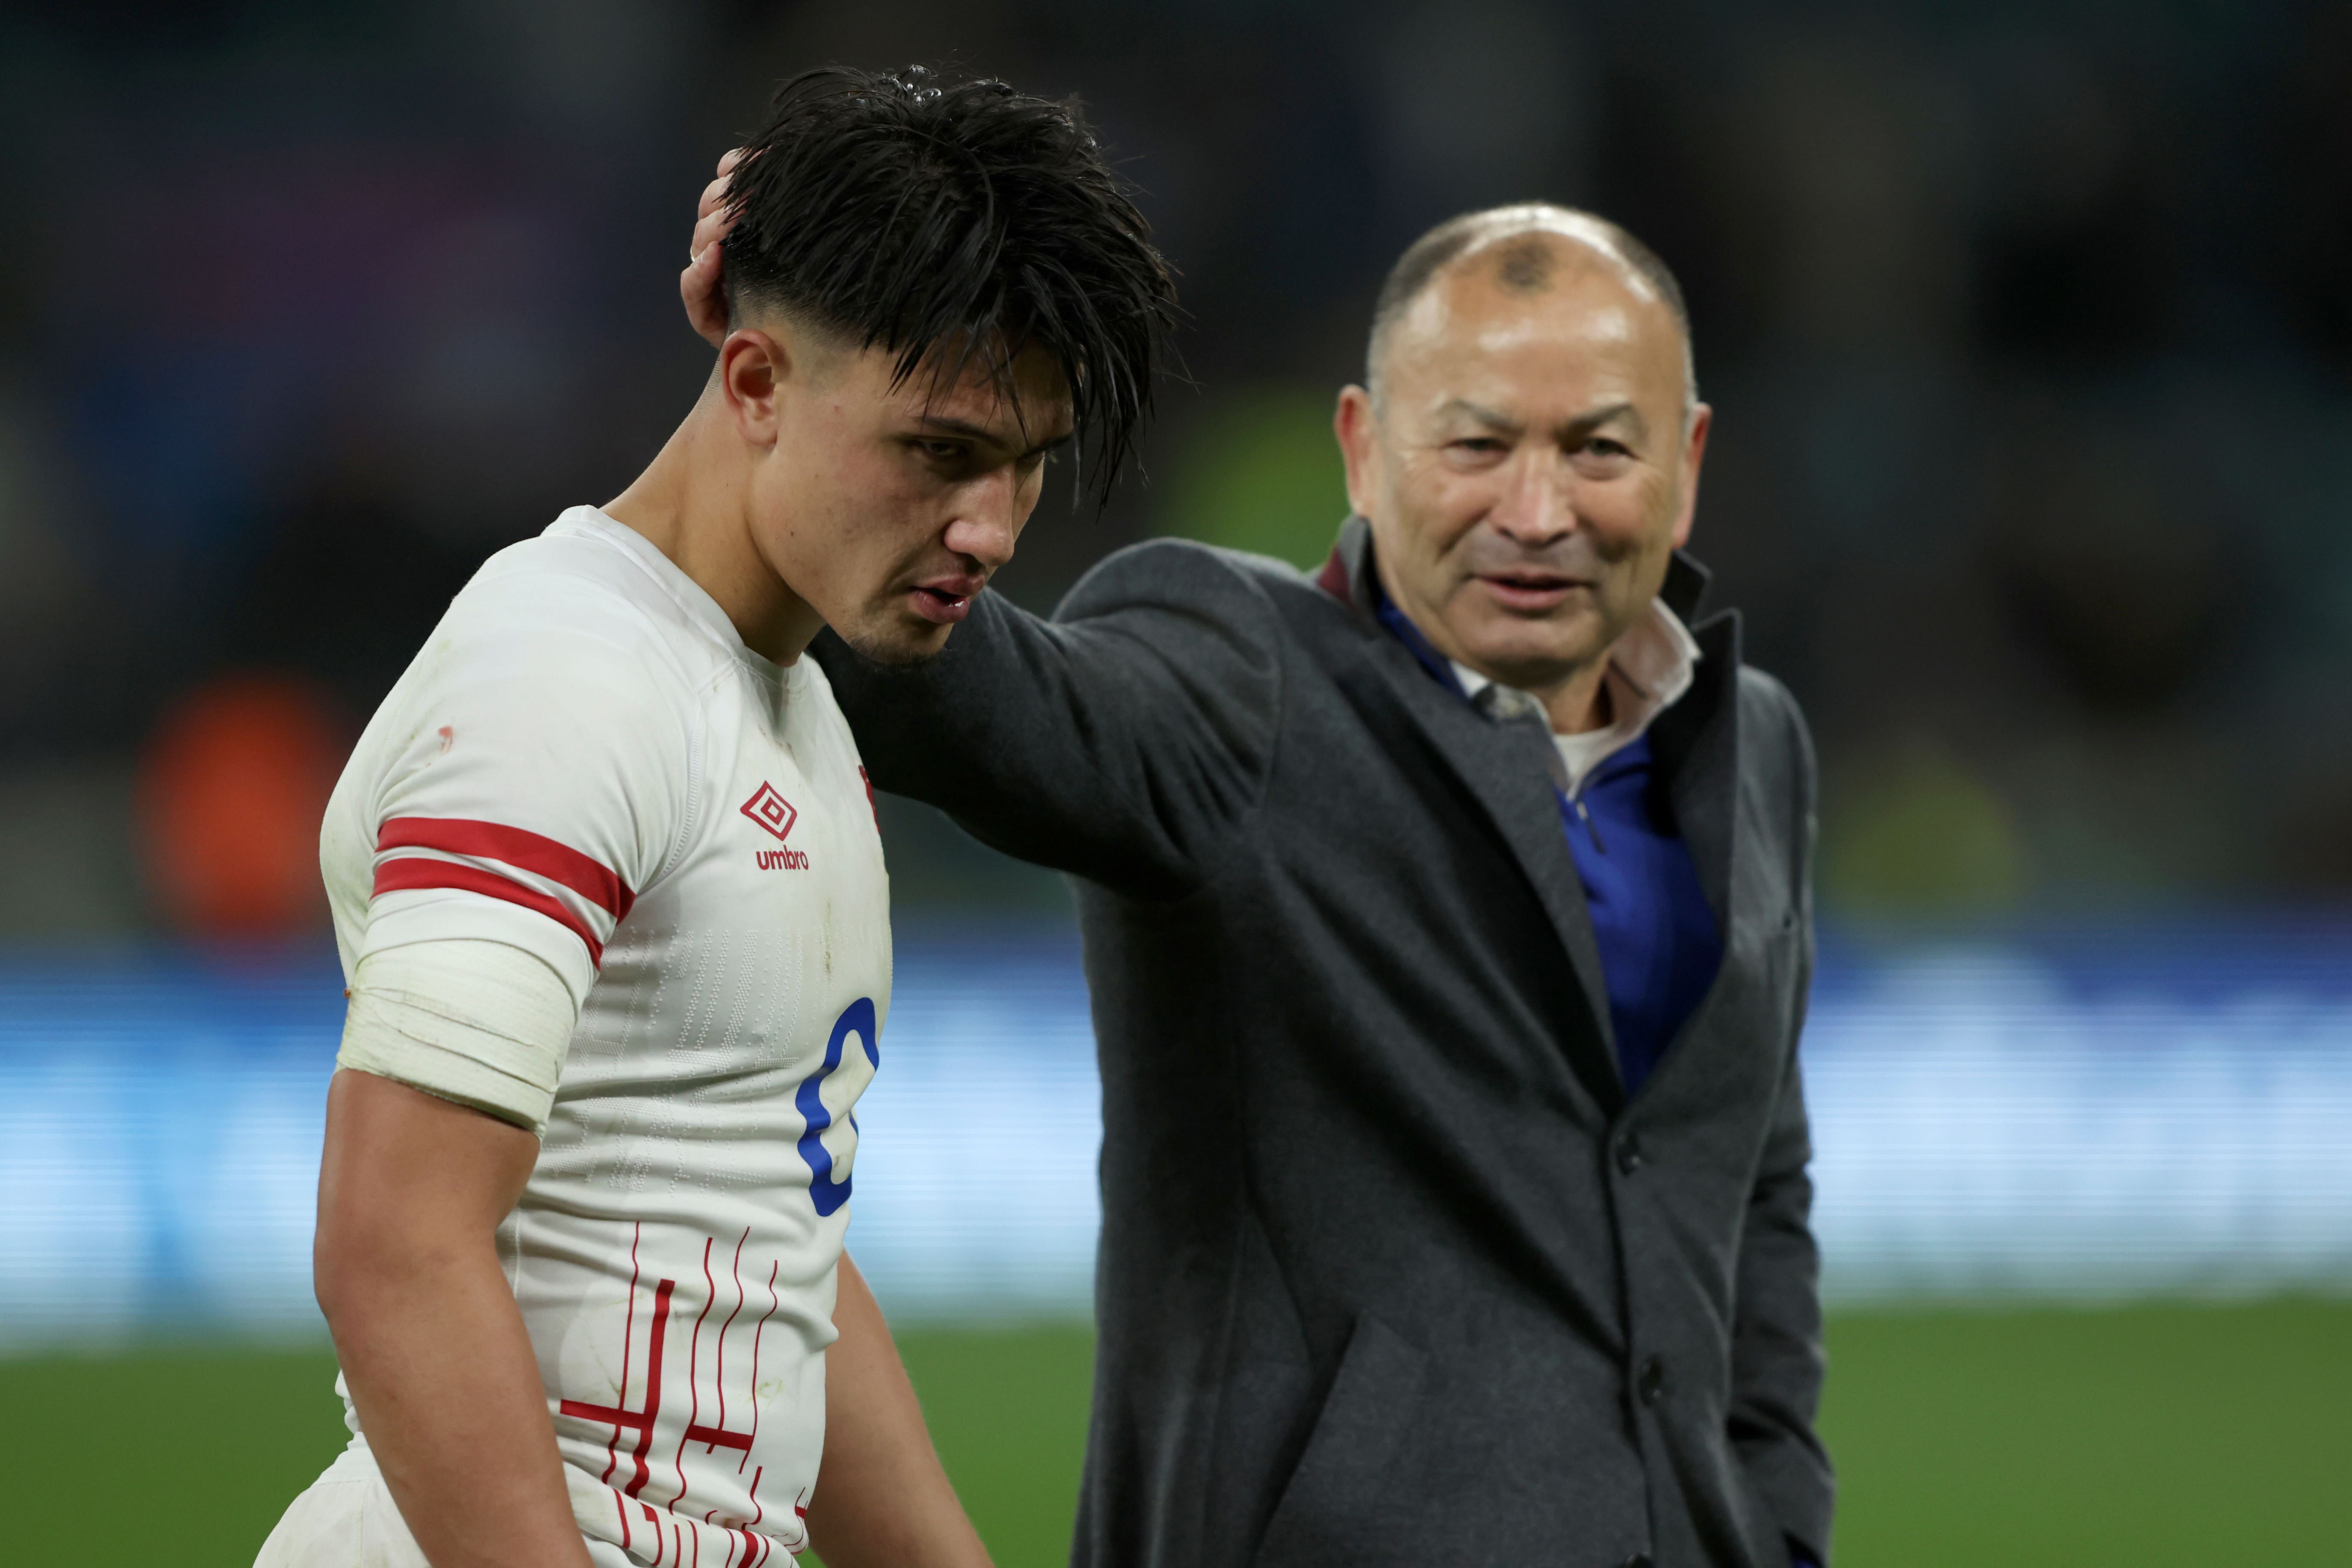 England head coach Eddie Jones backed the decision by Marcus Smith to settle for a 25-25 draw against New Zealand (AP/Ian Walton/PA)